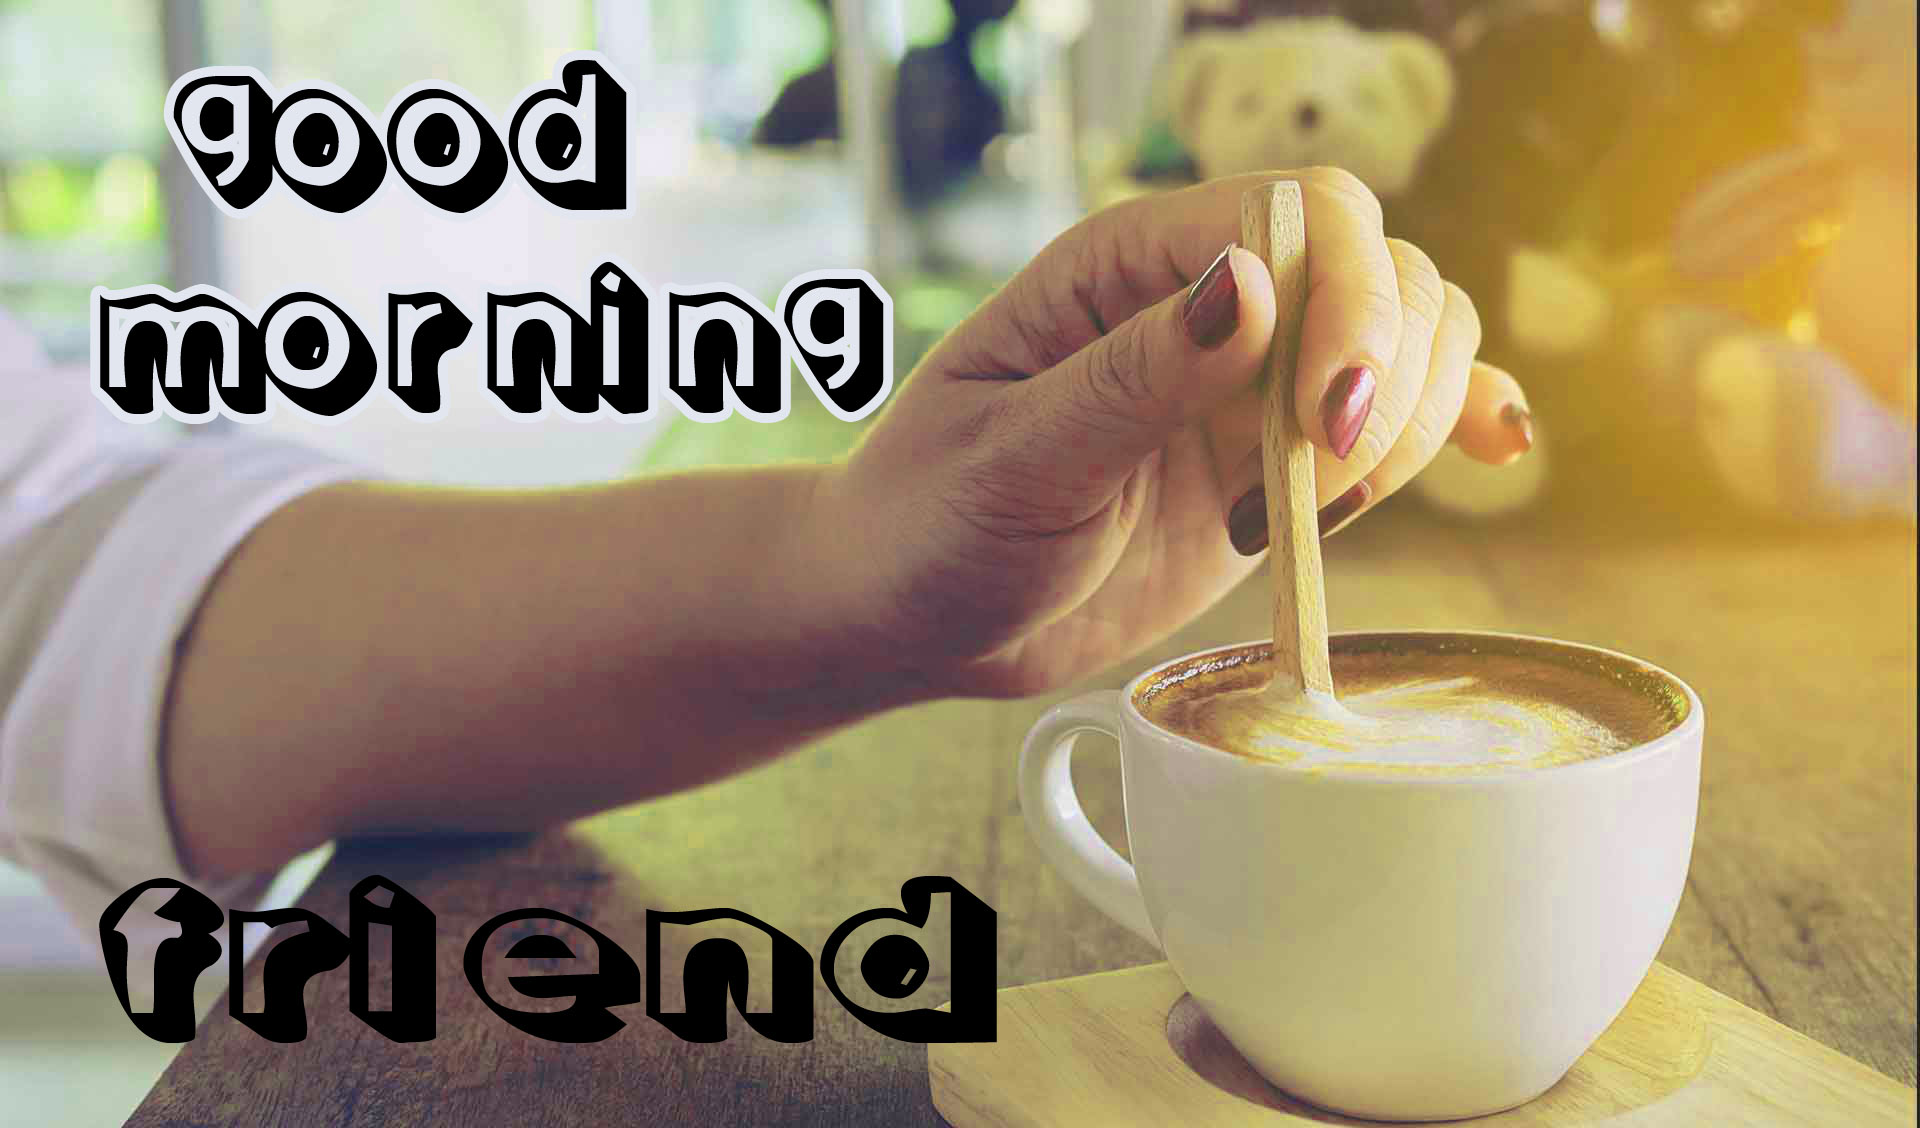 Friend Good Morning Images Photo for Facebook